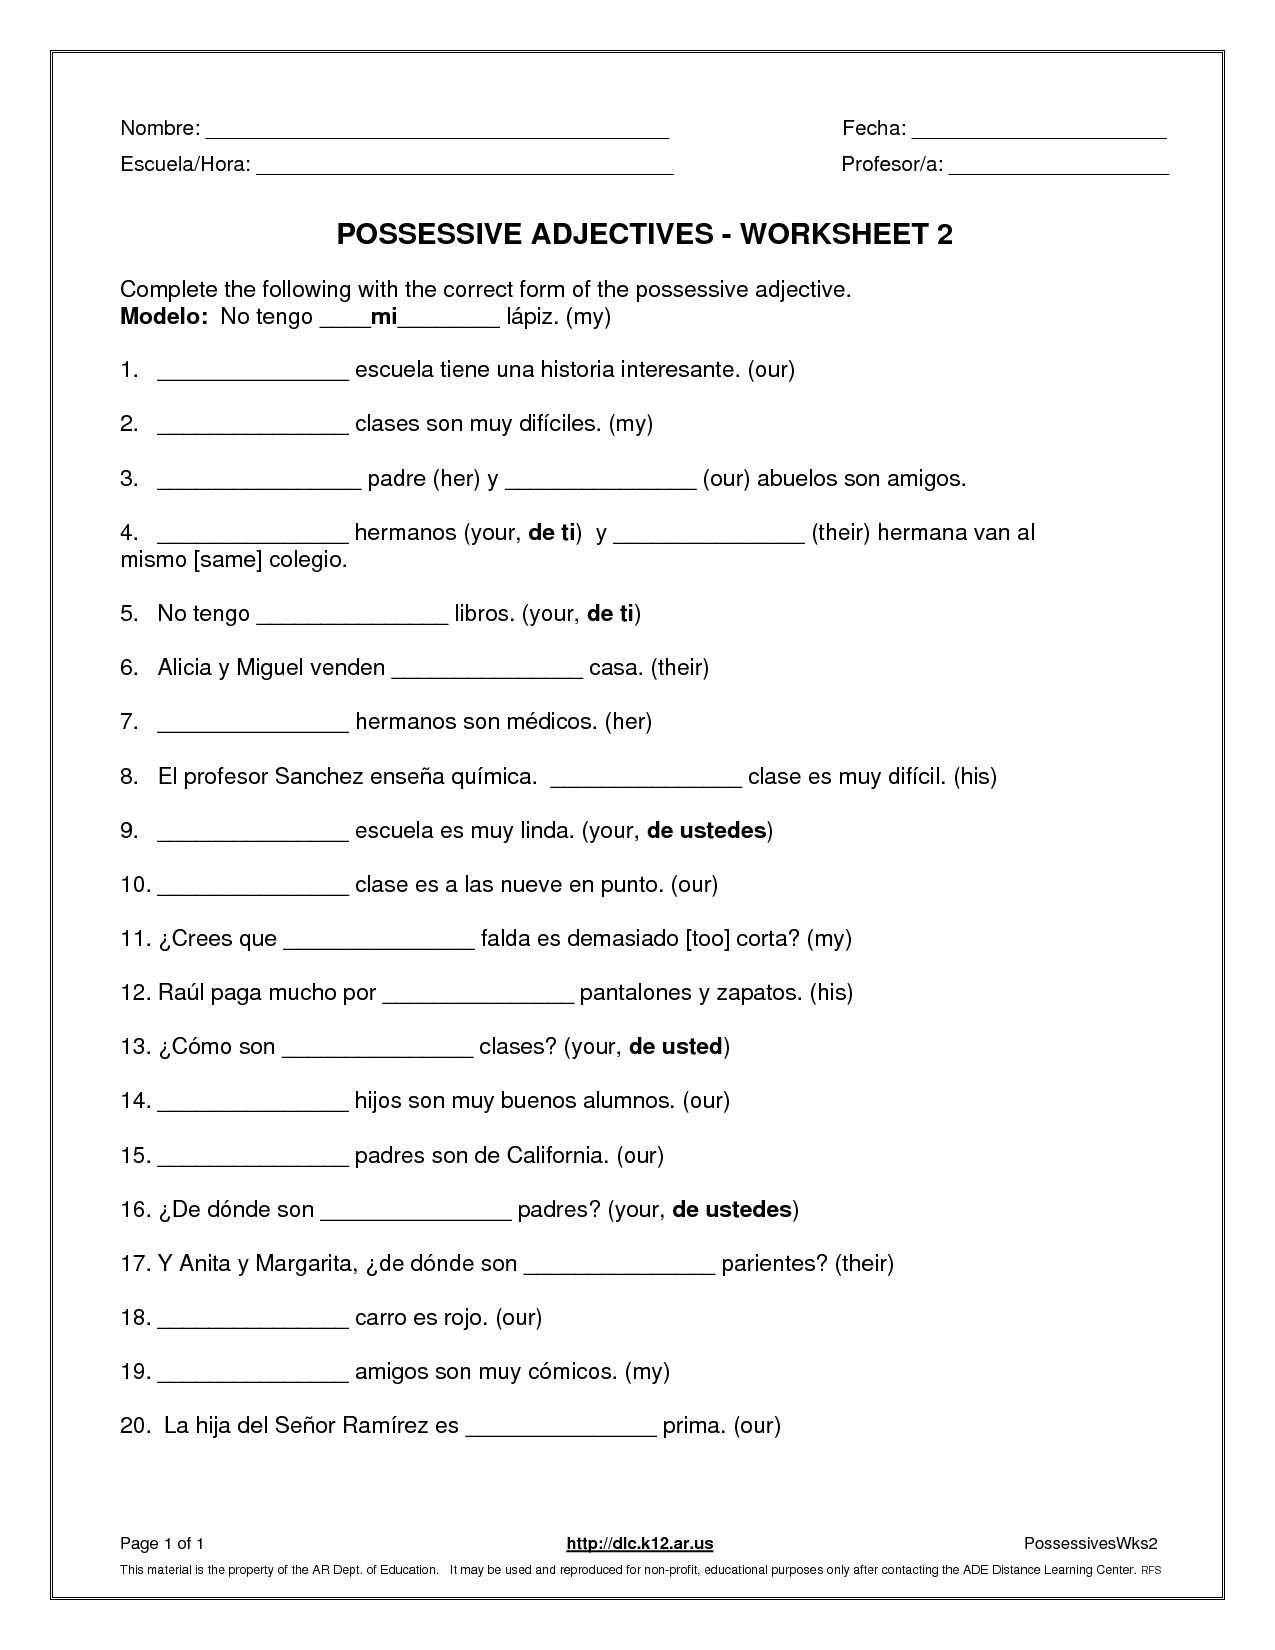 Agreement Of Adjectives Spanish Worksheet Answers 108625 Realidades And Agreement Of Adjectives Spanish Worksheet Answers